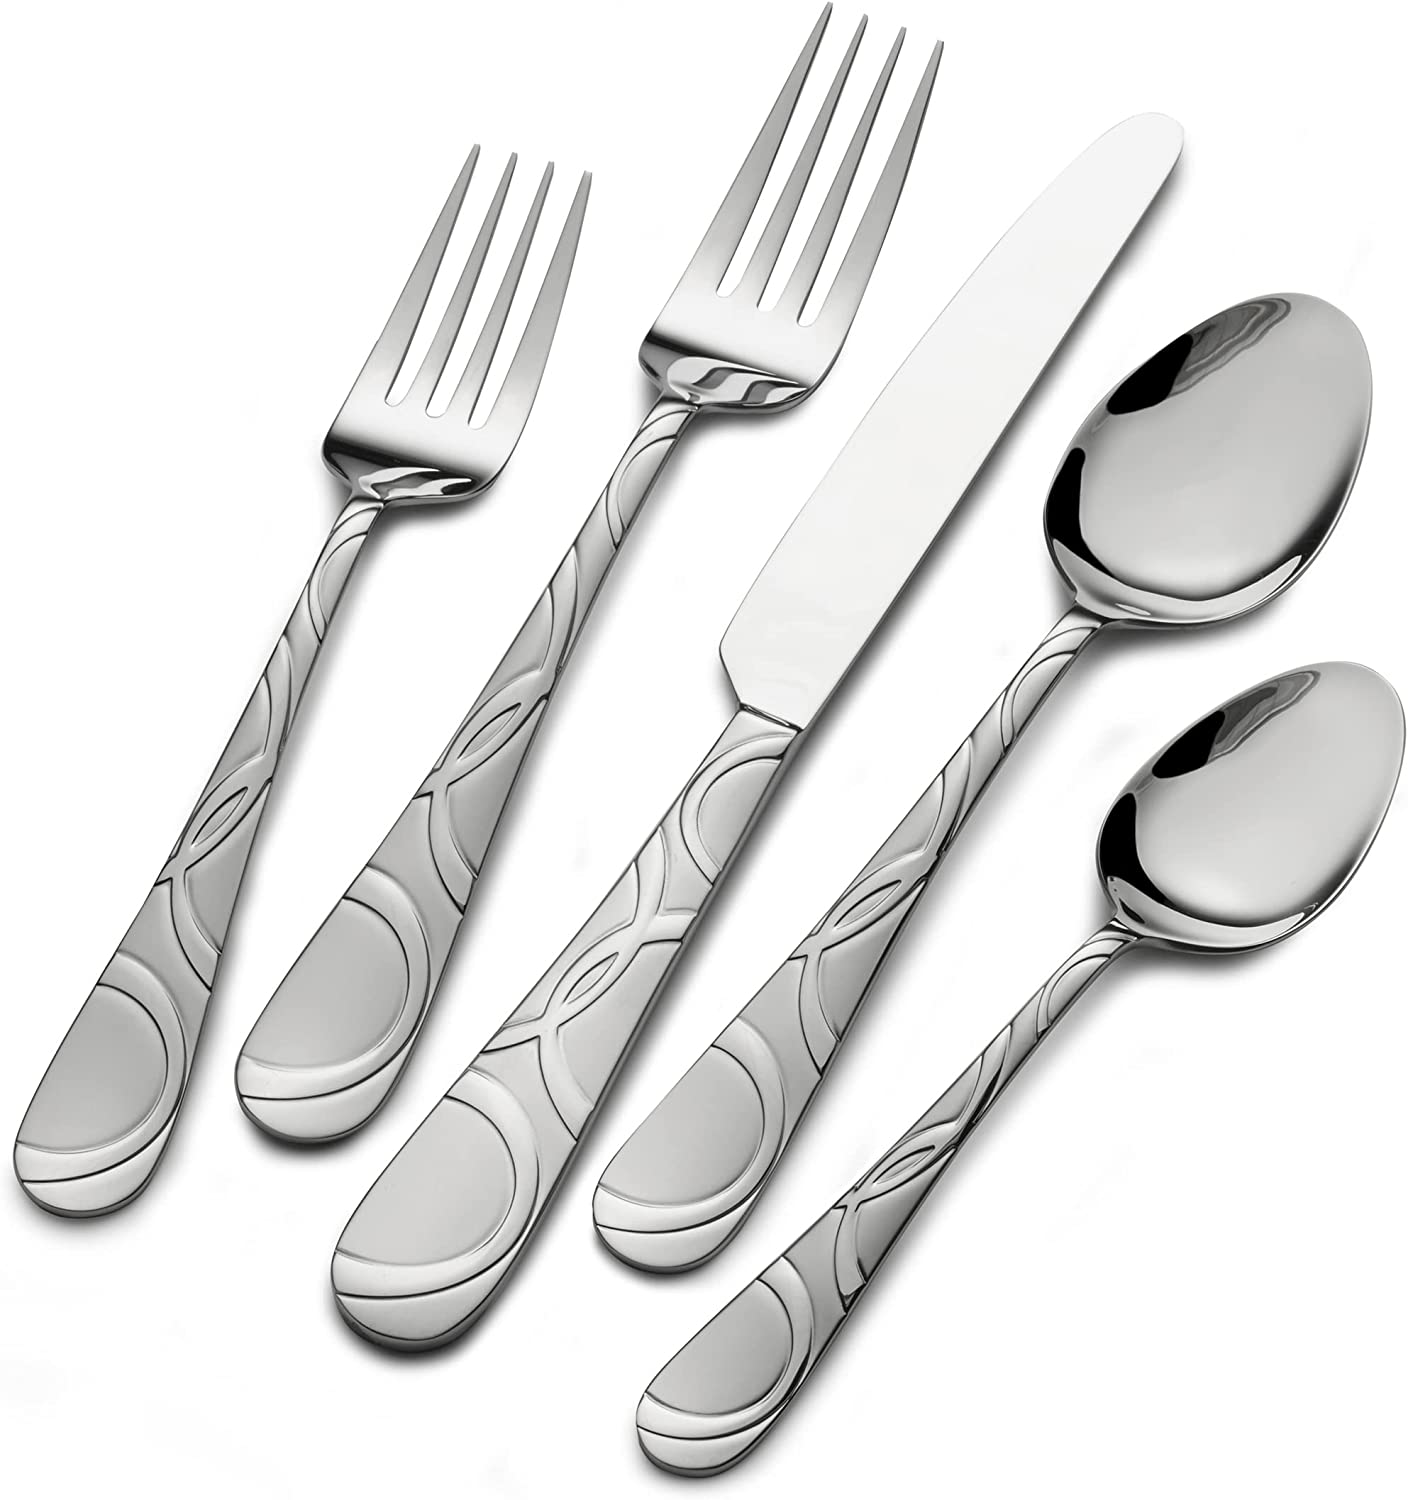 Pfaltzgraff Garland Frost 53-Piece Stainless Steel Flatware Serving Utensil Set and Steak Knives， Service for 8